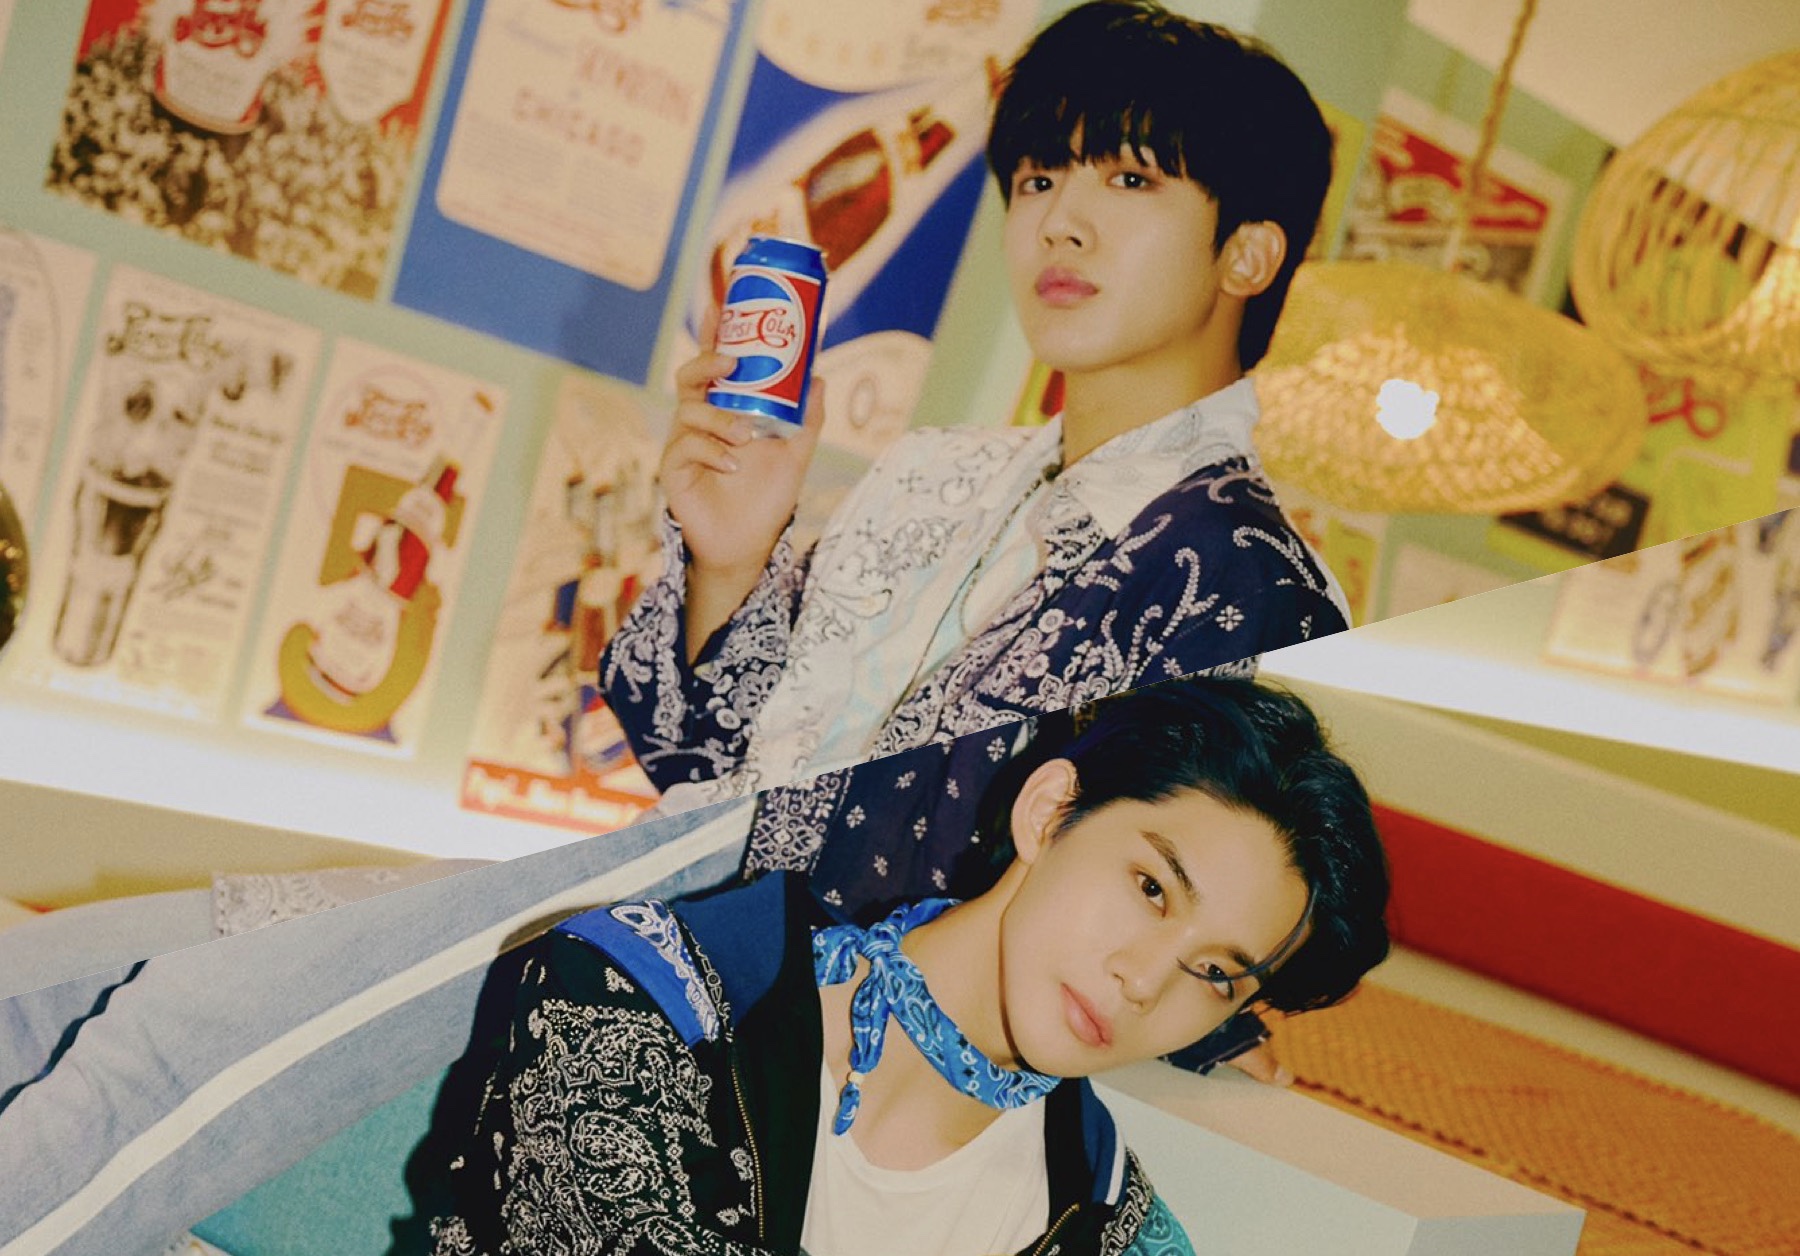 CIX’s Bae Jin Young and WEi’s Kim Yo Han release ‘I Believe’ collaboration for Pepsi